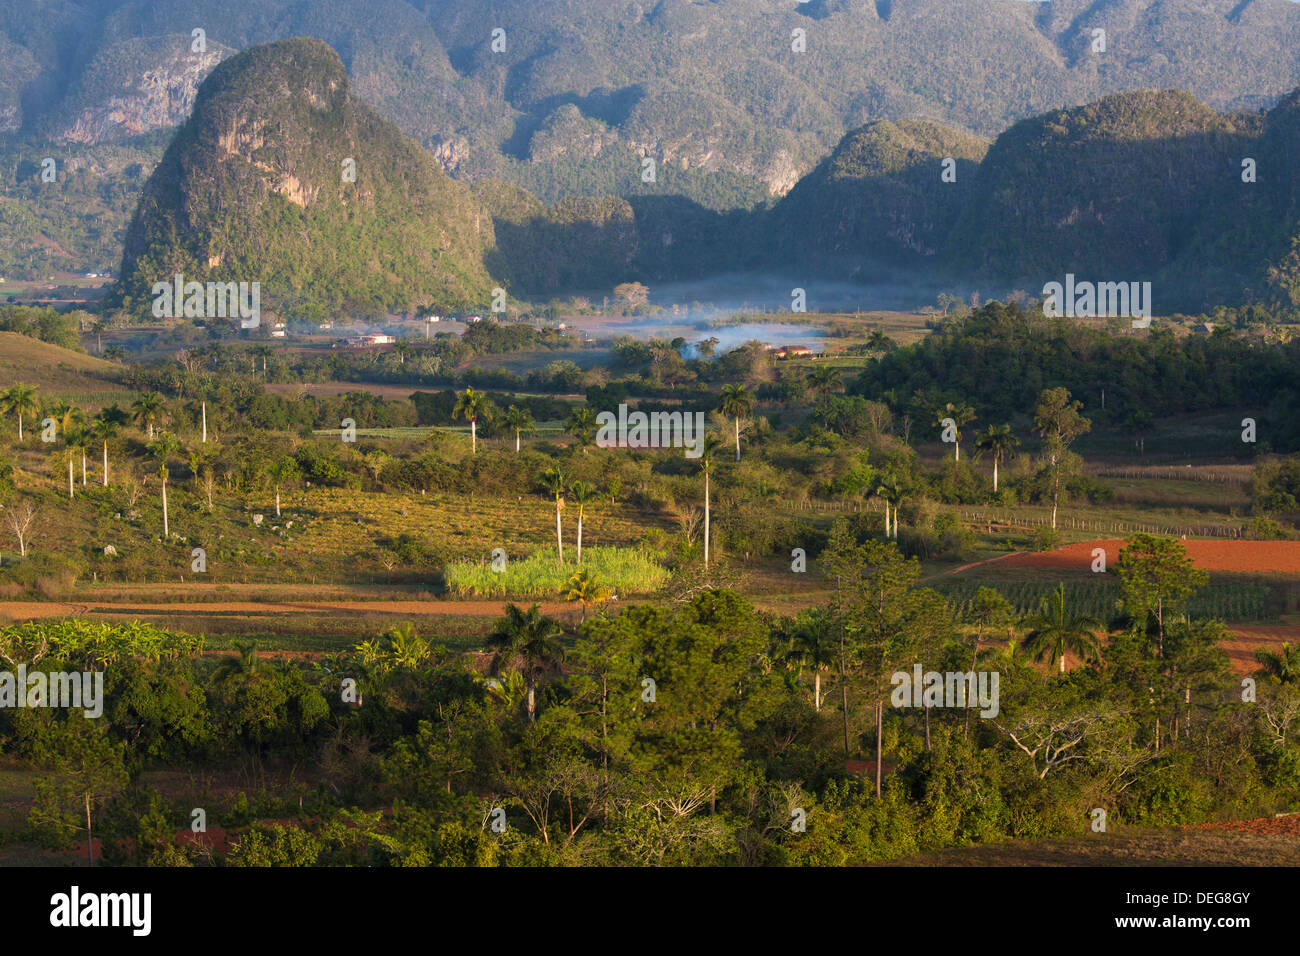 Vinales Valley, UNESCO World Heritage Site, bathed in early morning sunlight, Vinales, Pinar Del Rio Province, Cuba, West Indies Stock Photo